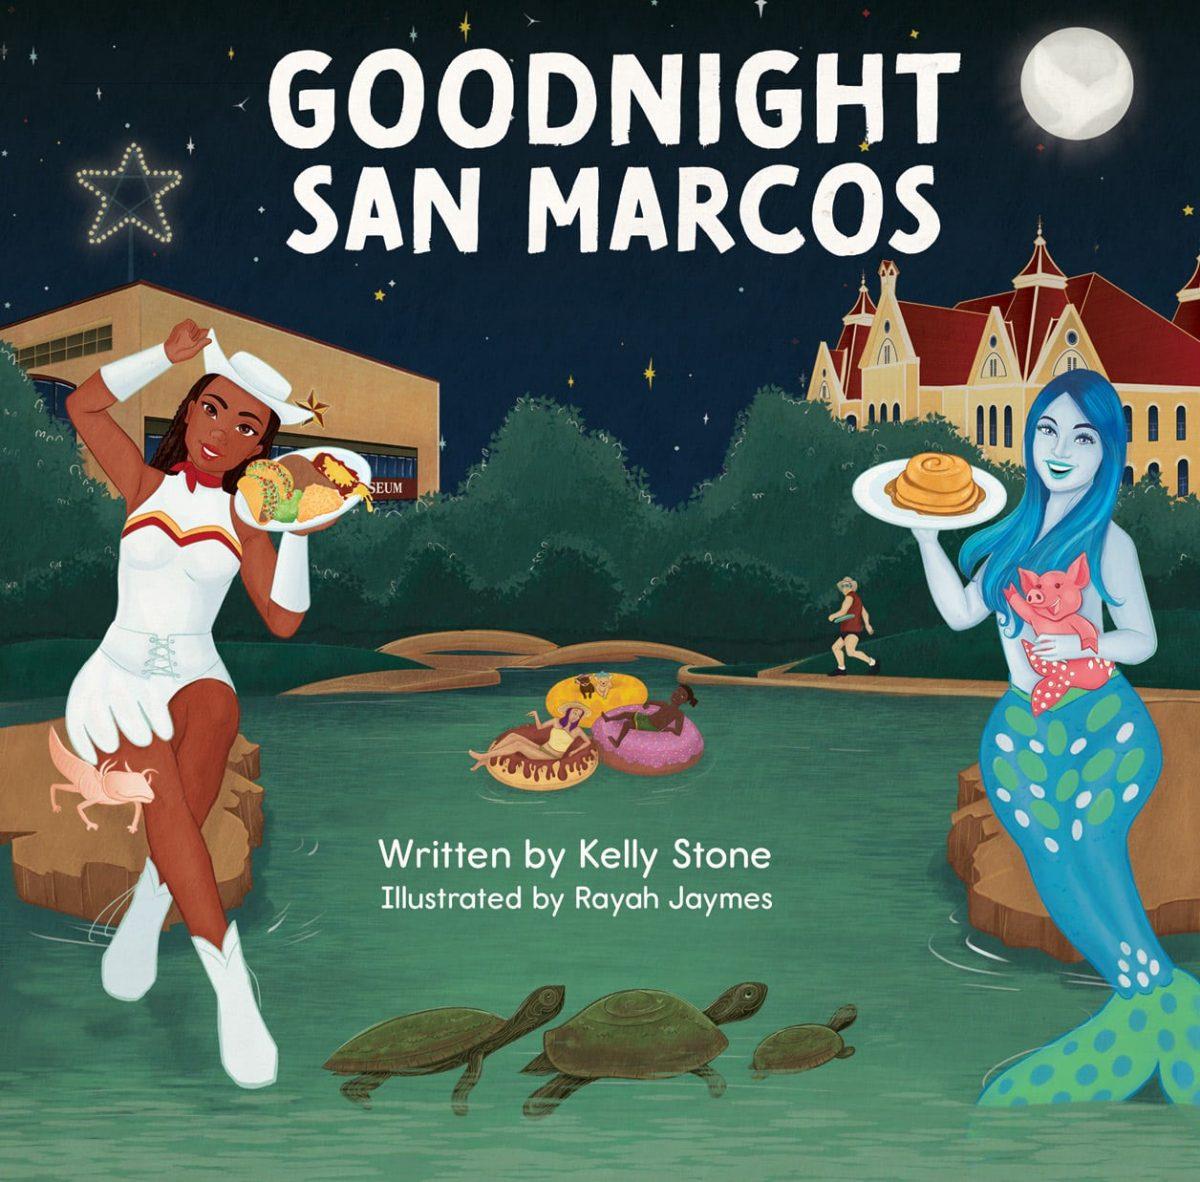 The cover of Kelly Stones book Goodnight San Marcos illustrated by Rayah Jaymes.